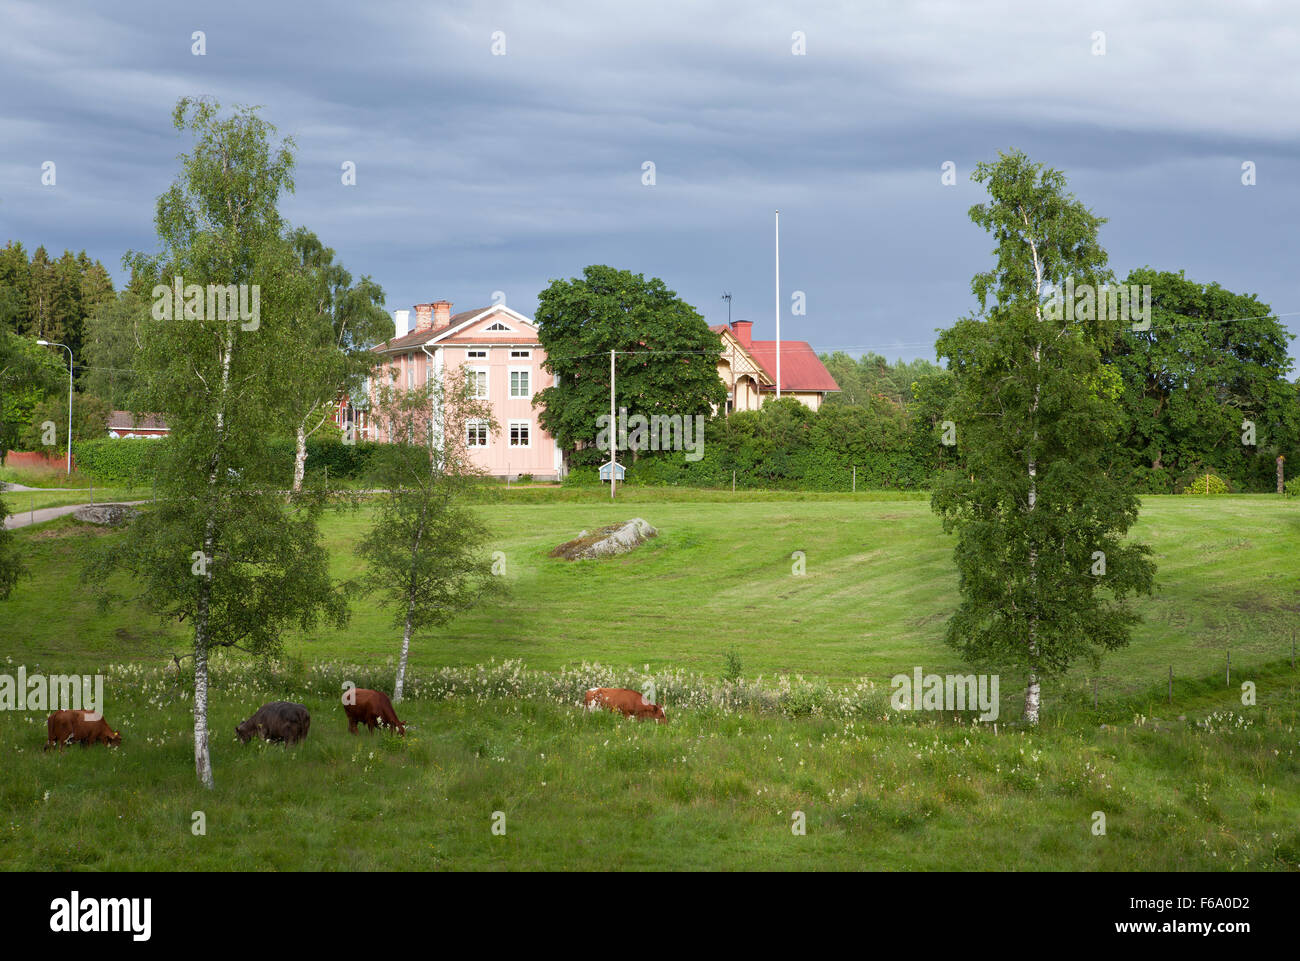 HALSINGLAND, SWEDEN ON JULY 23, 2015. View of a beautiful wooden homestead. UNESCO World Heritage Site. Farmland. Editorial use. Stock Photo